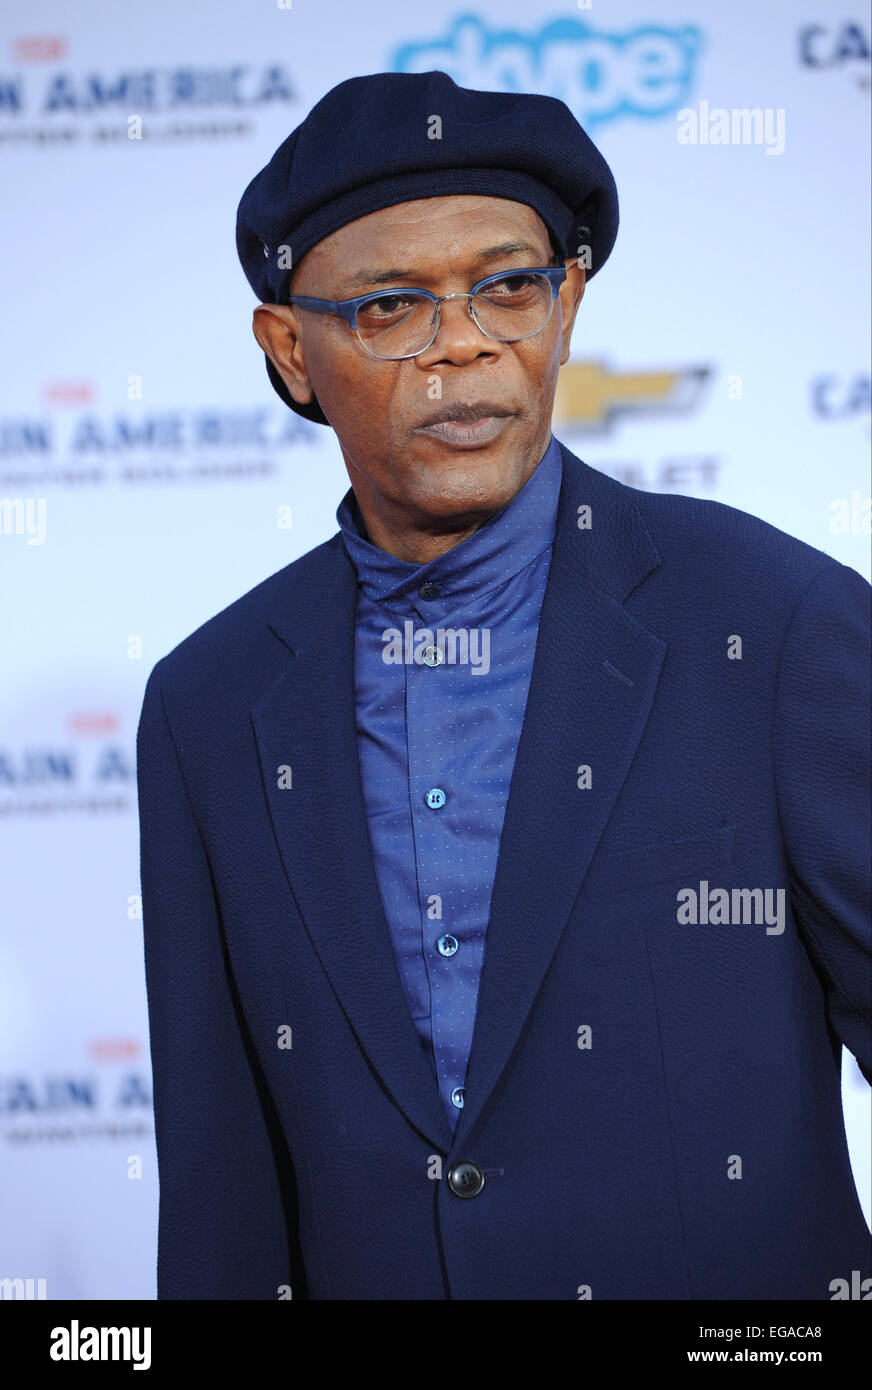 LOS ANGELES, CA - MARCH 13, 2014: Samuel L. Jackson at the world premiere of his movie 'Captain America: The Winter Soldier' at the El Capitan Theatre, Hollywood. Stock Photo